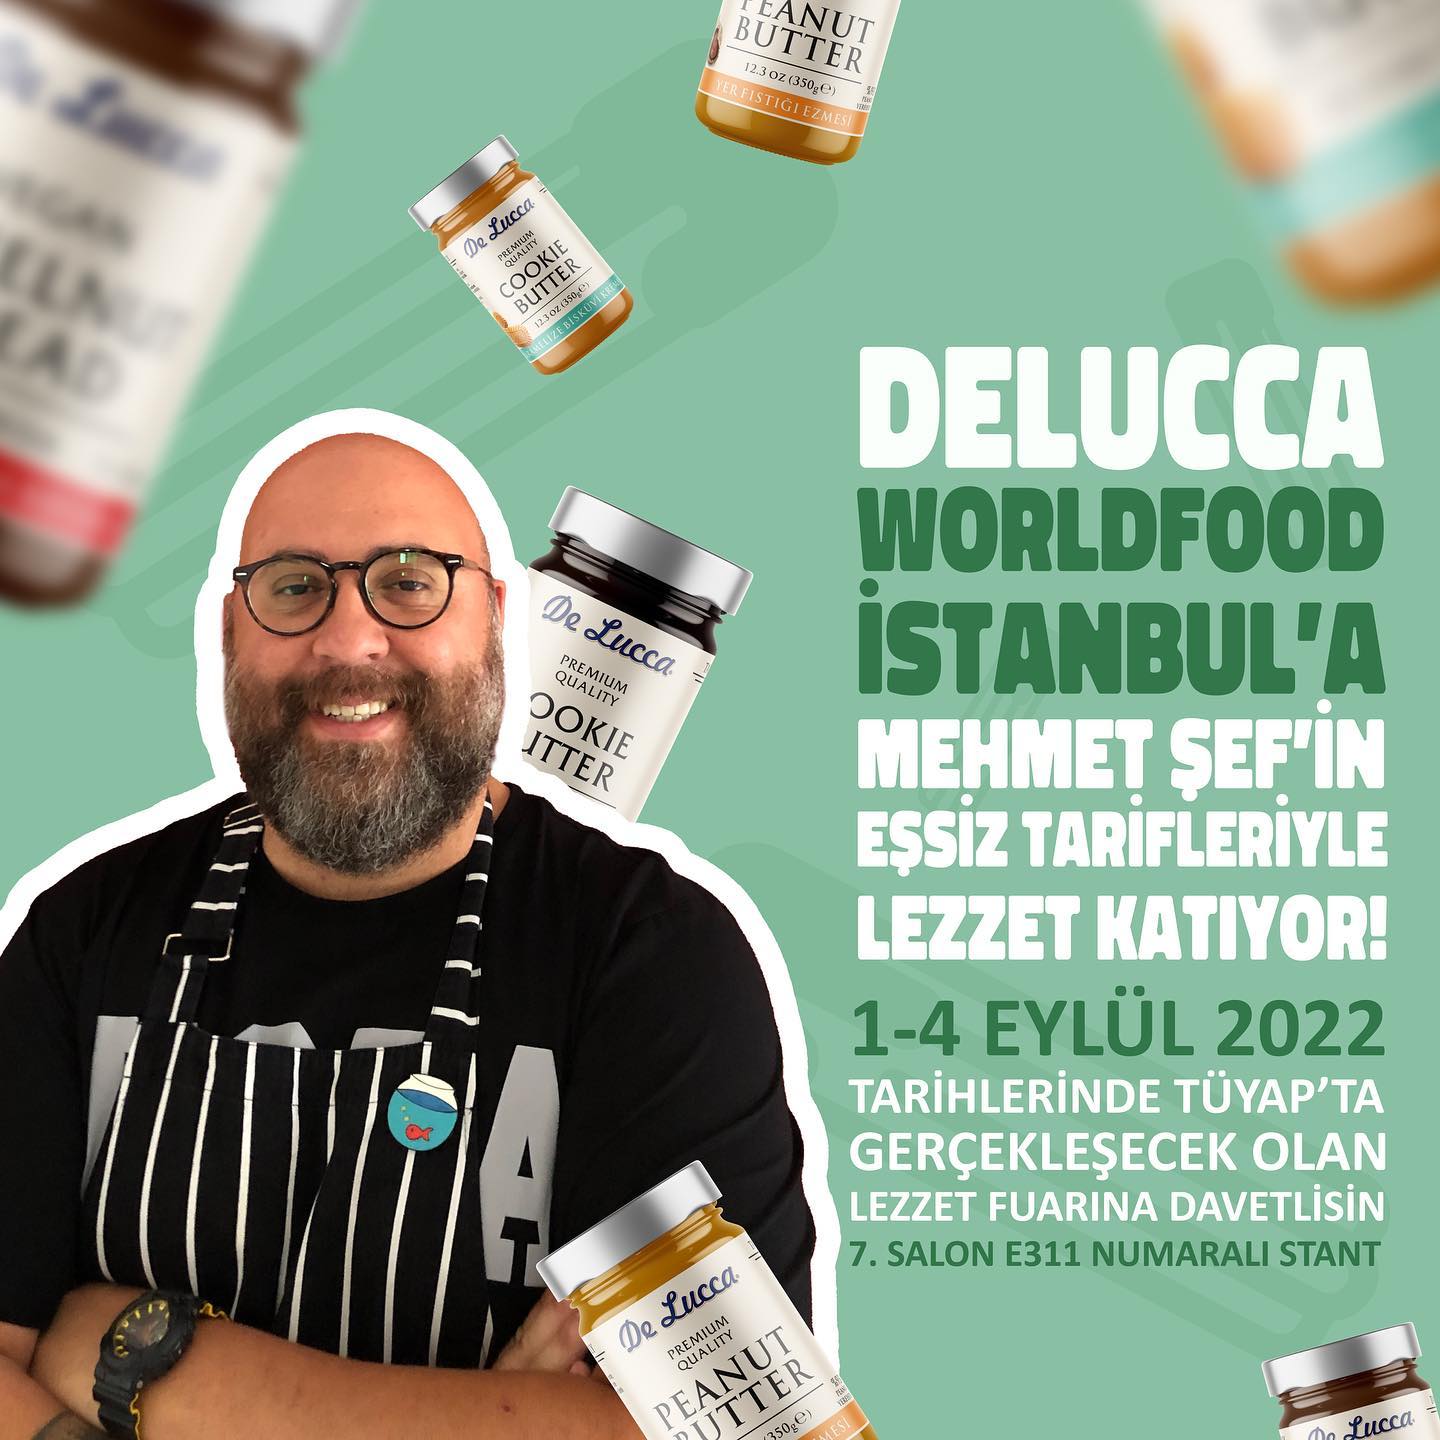 De Lucca Worldfood İstanbul 2